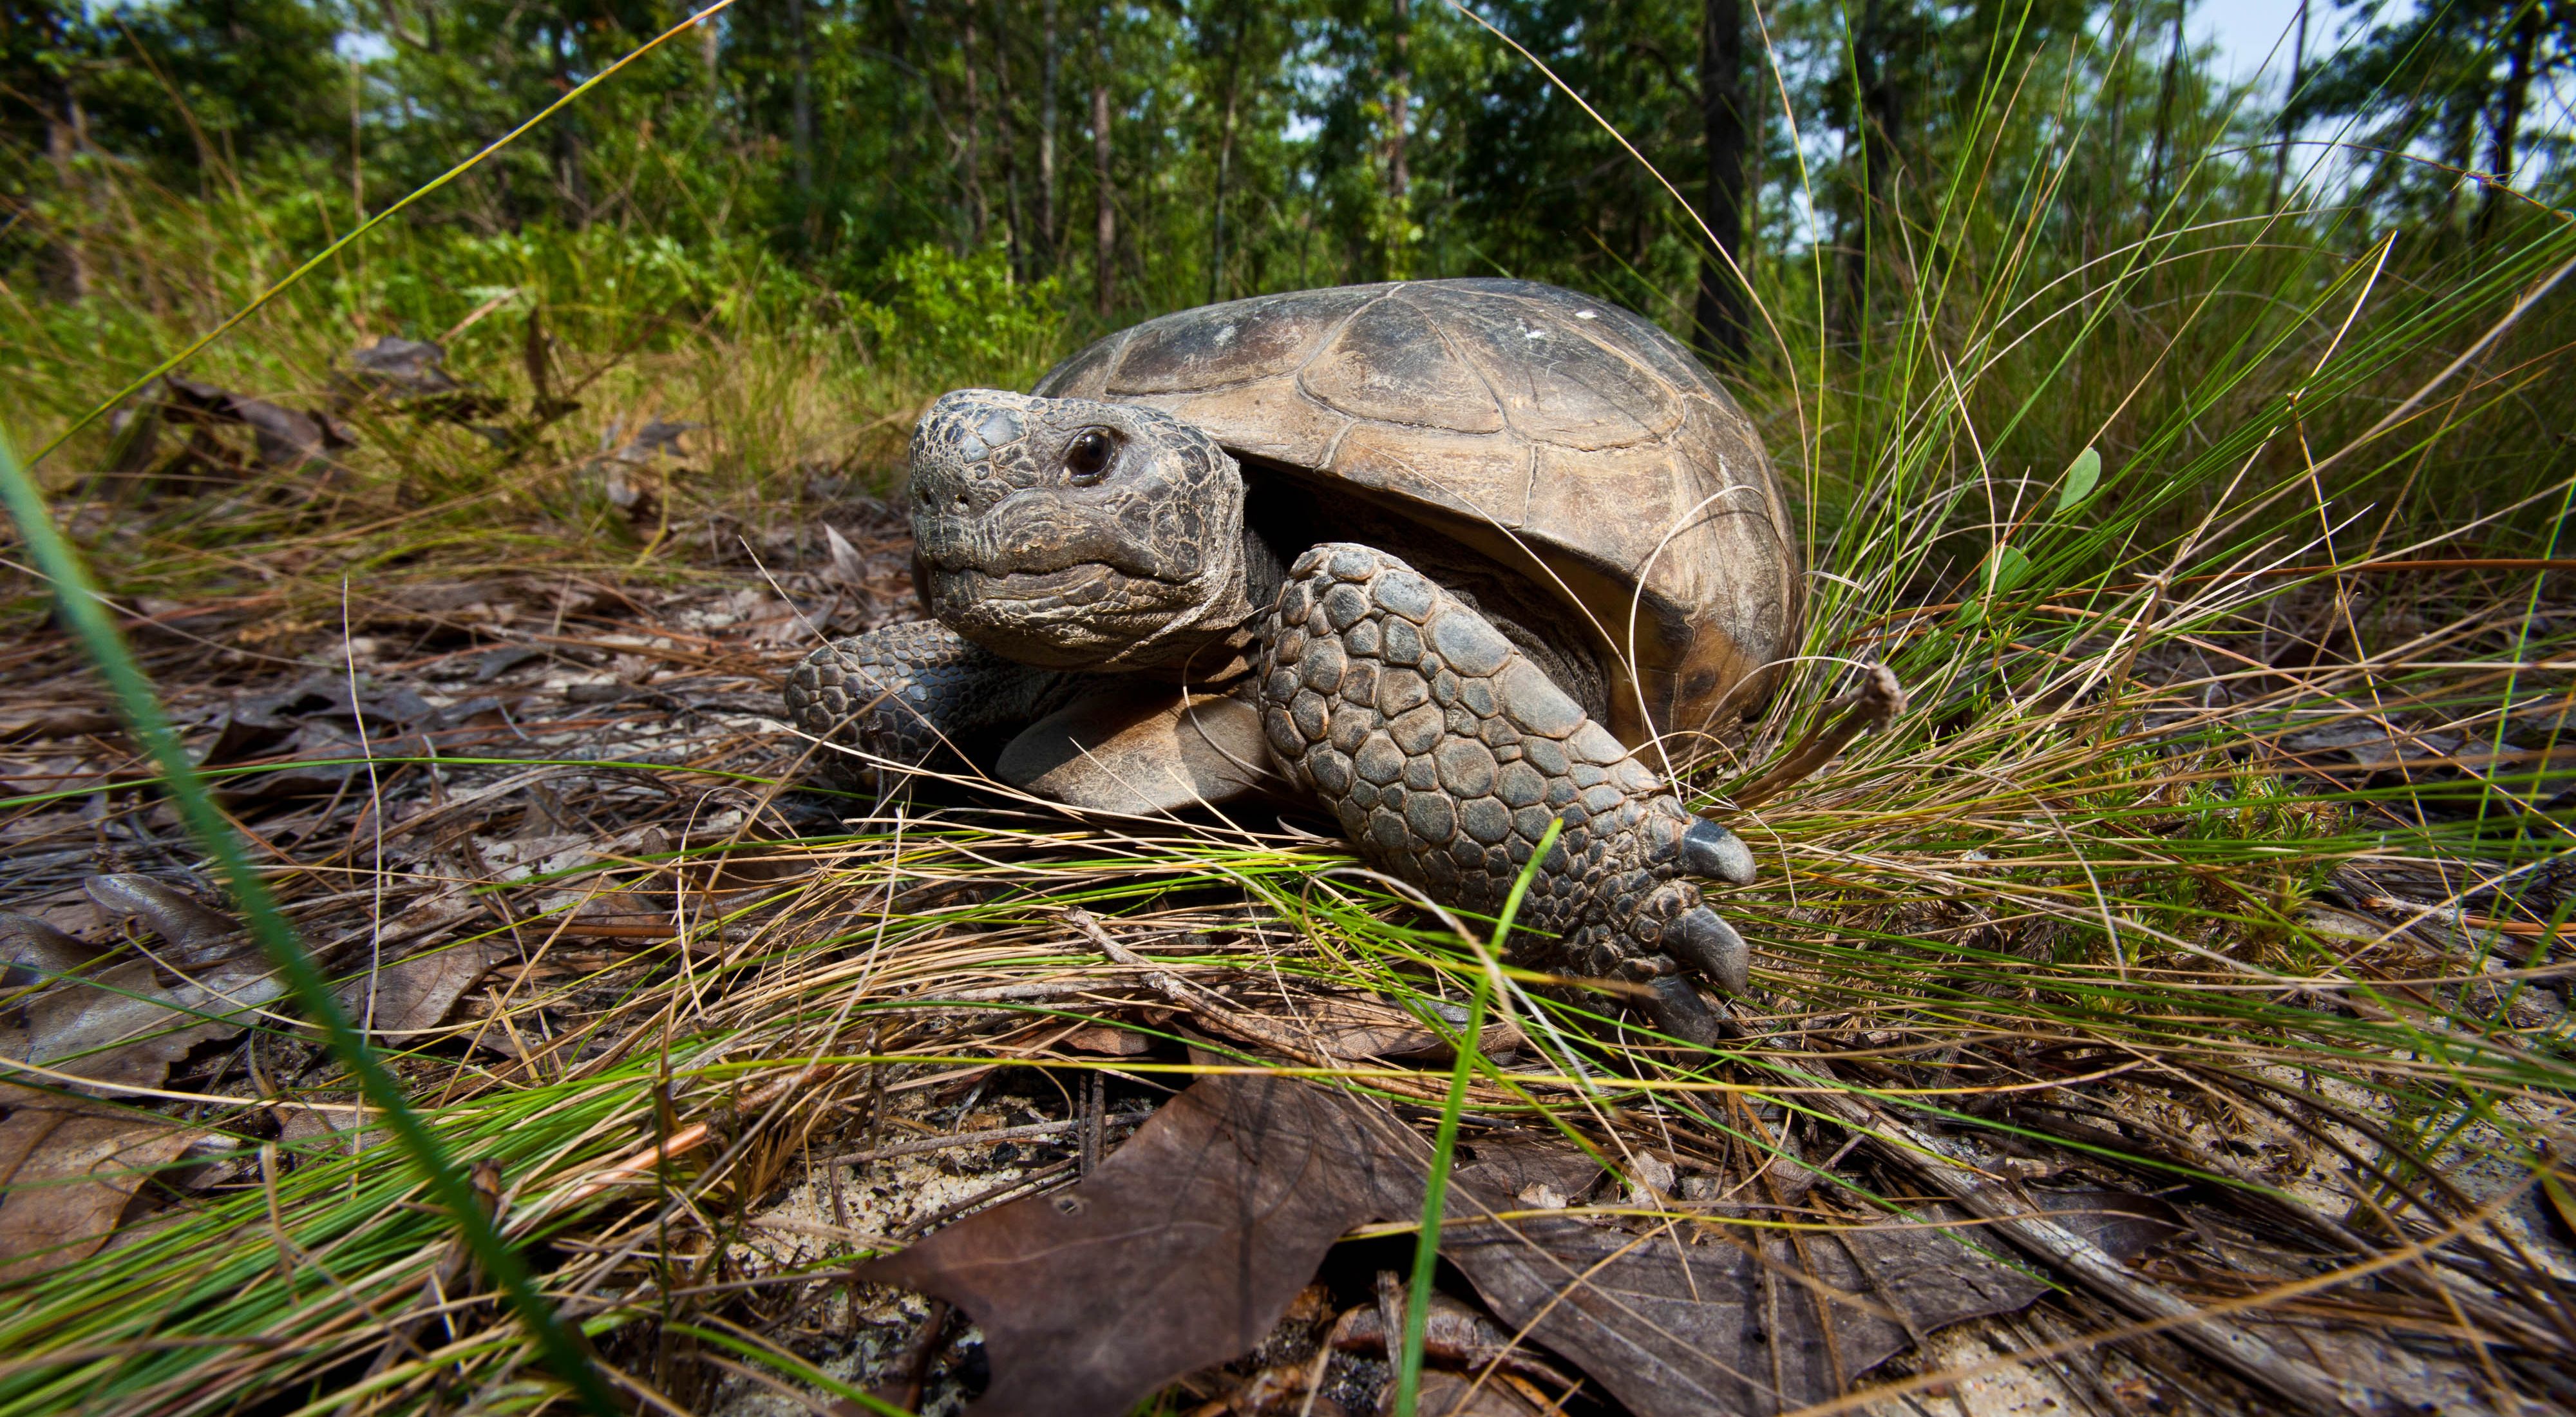 At the Charles Harrold Preserve in eastern Georgia, burrows of the threatened gopher tortoise provide shelter for hundreds of other animal species.